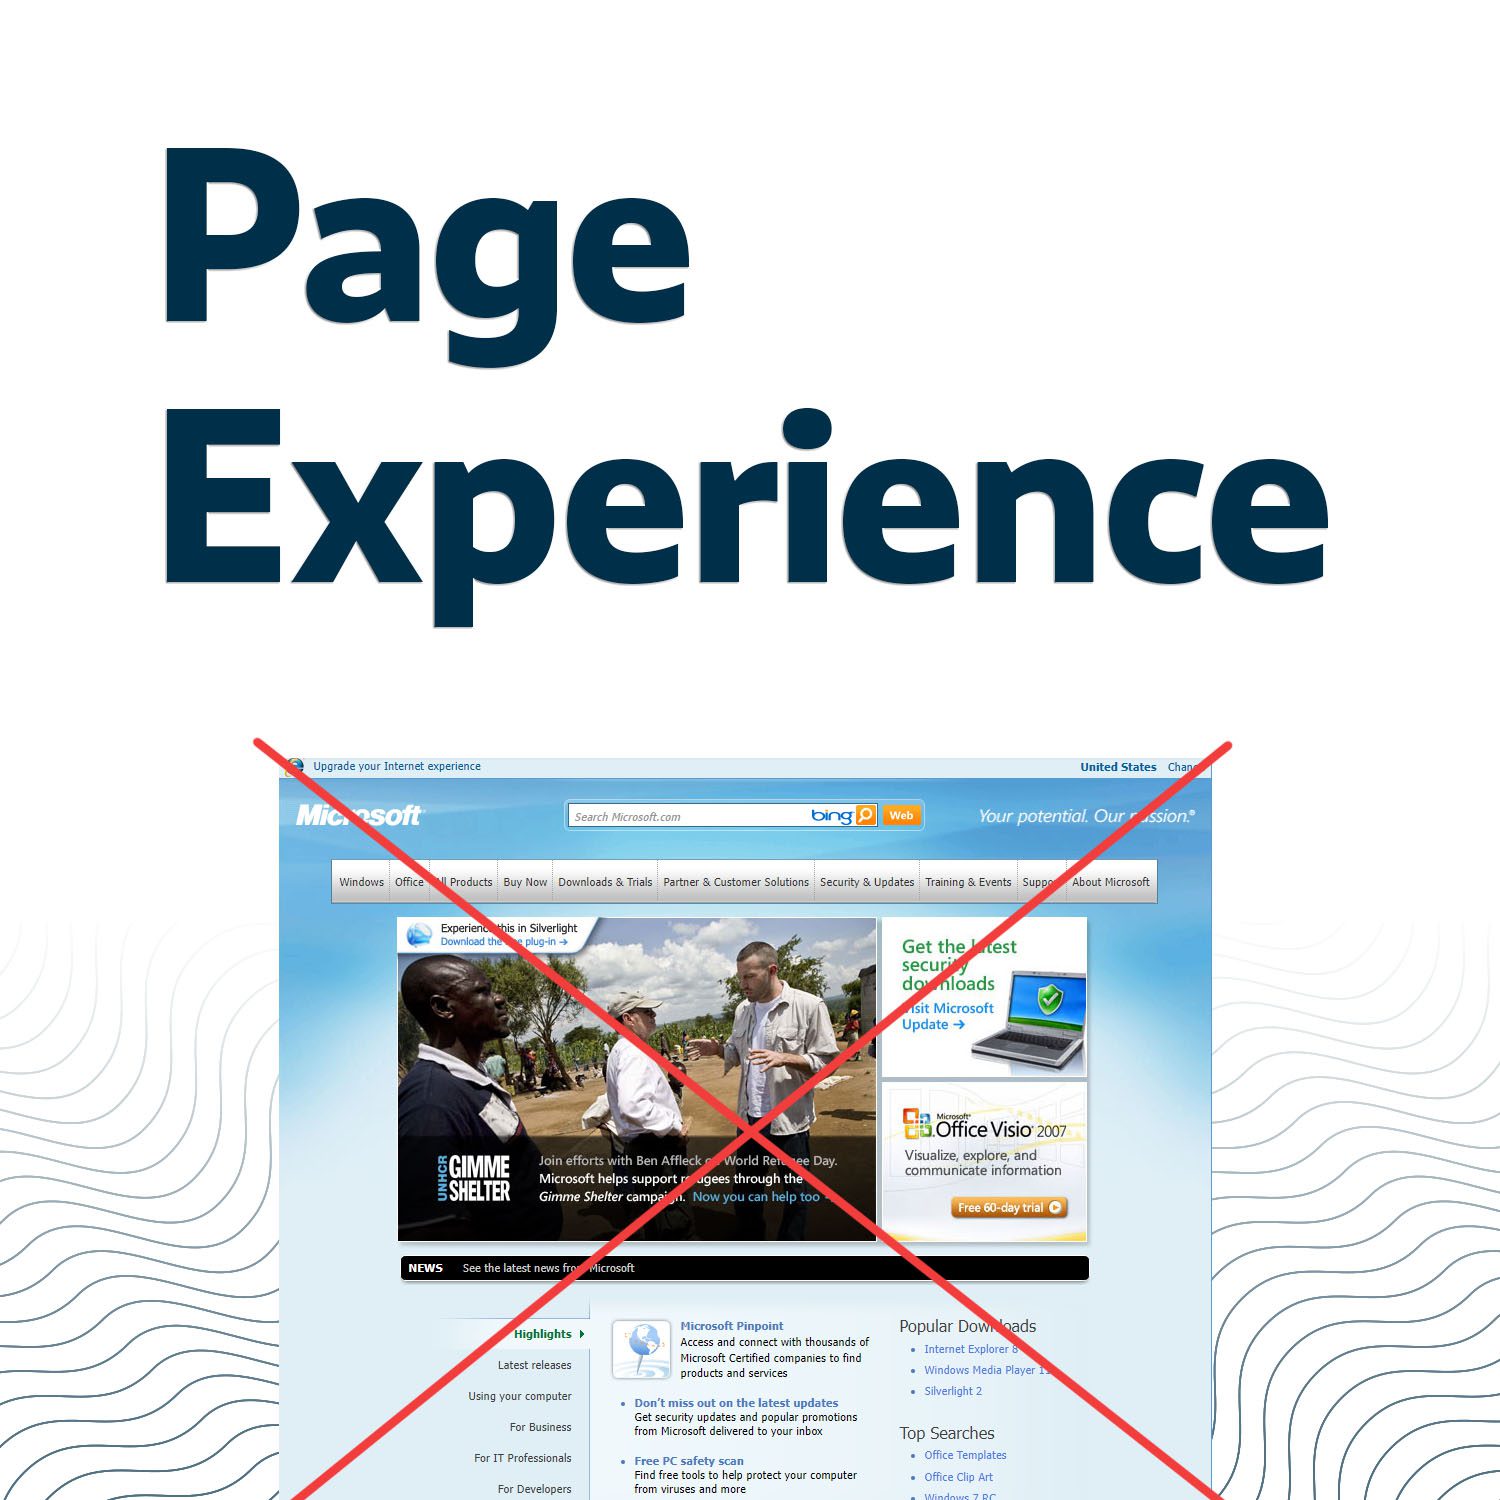 How to Improve Page Experience